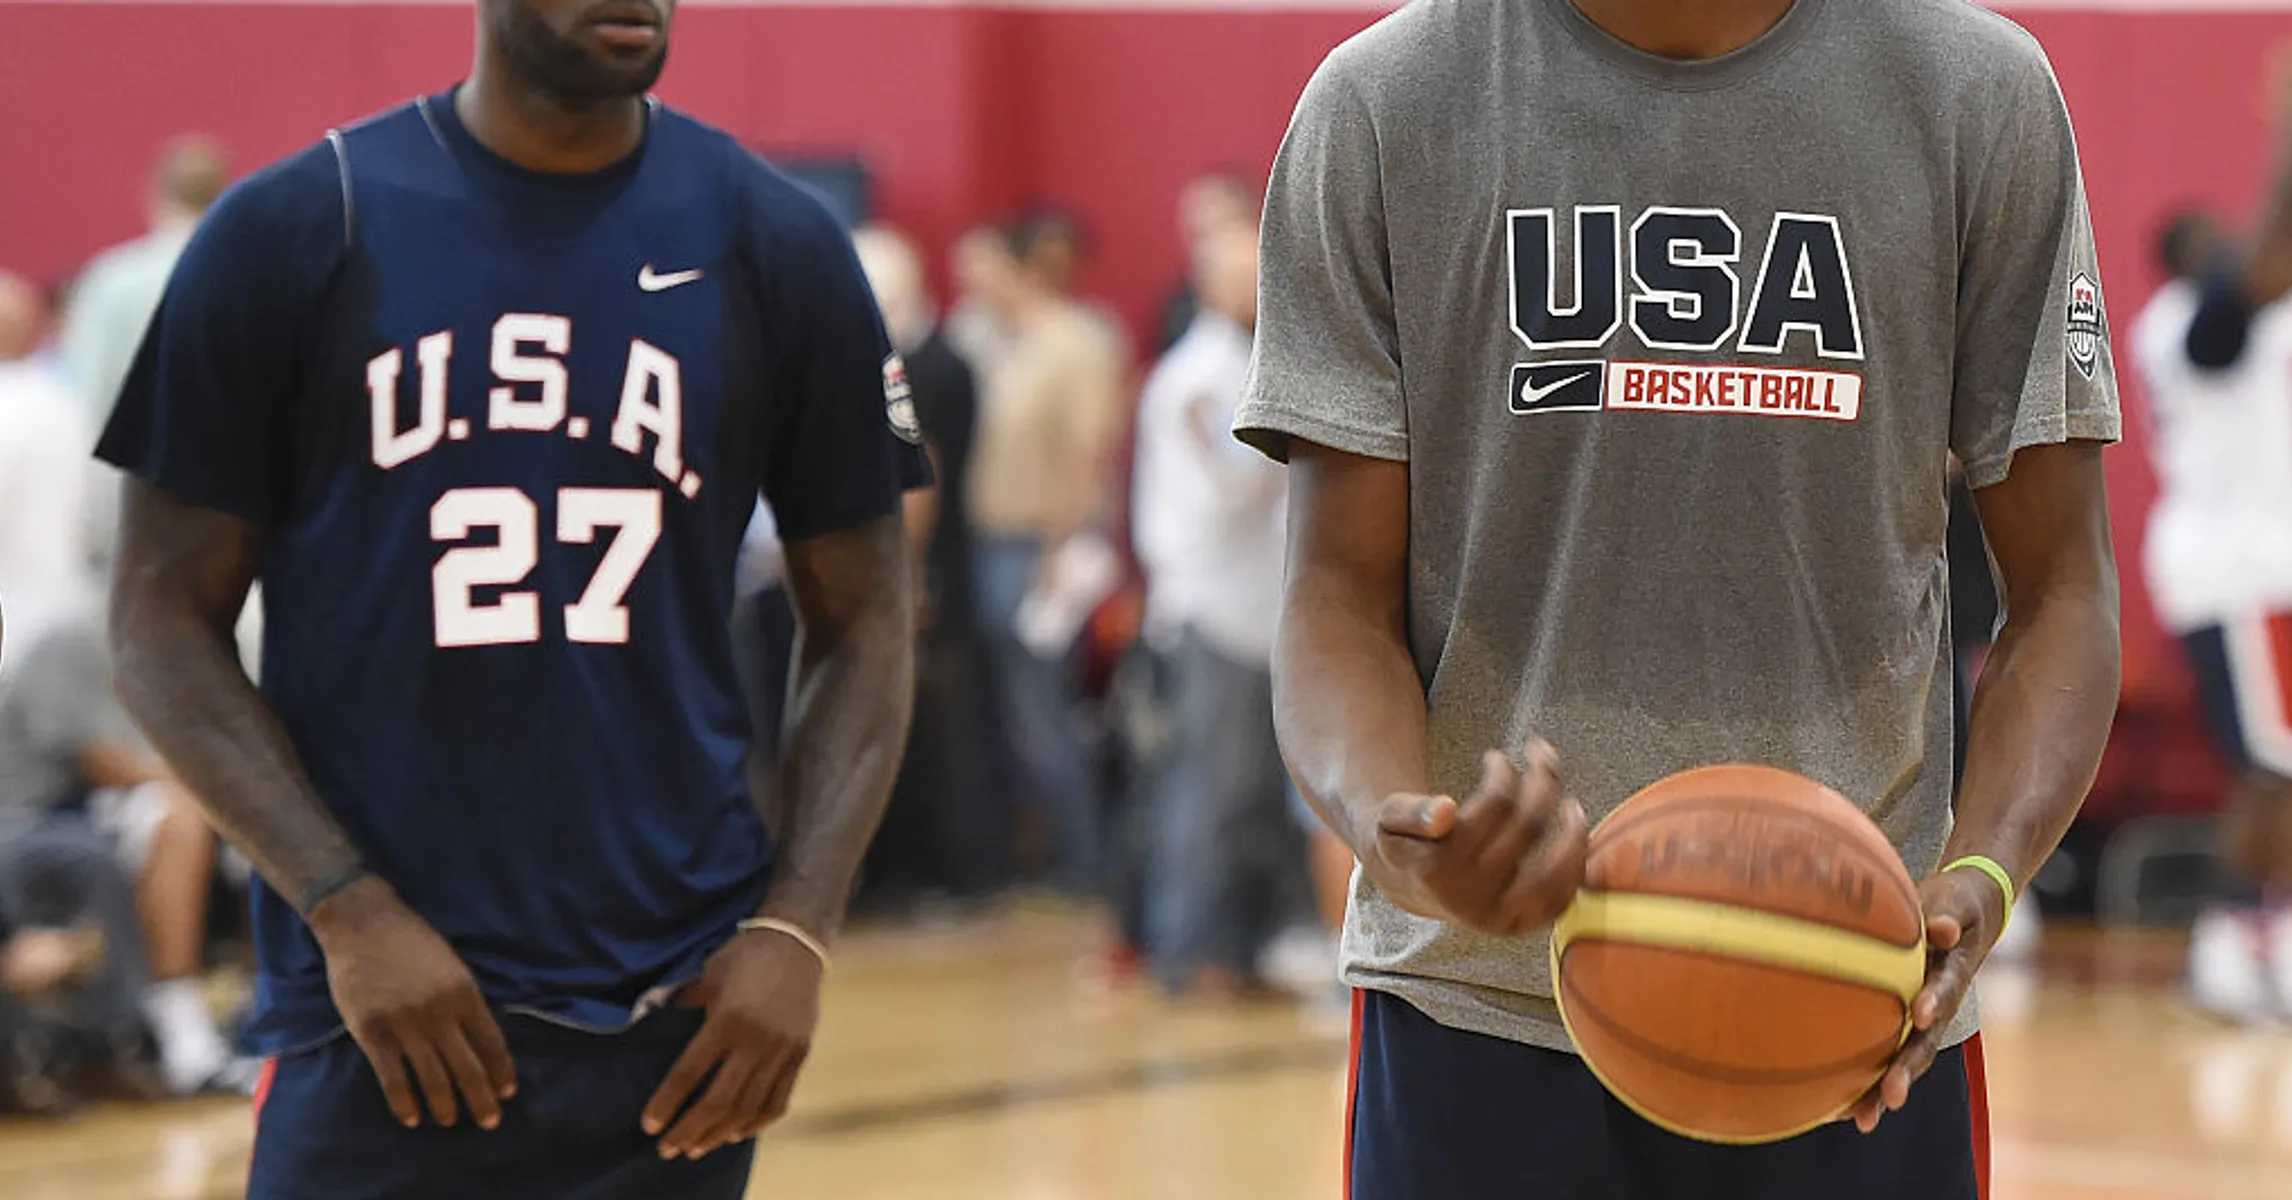 USA Basketball: LeBron James, Kevin Durant, Steph Curry, And More Announced For Olympic Roster